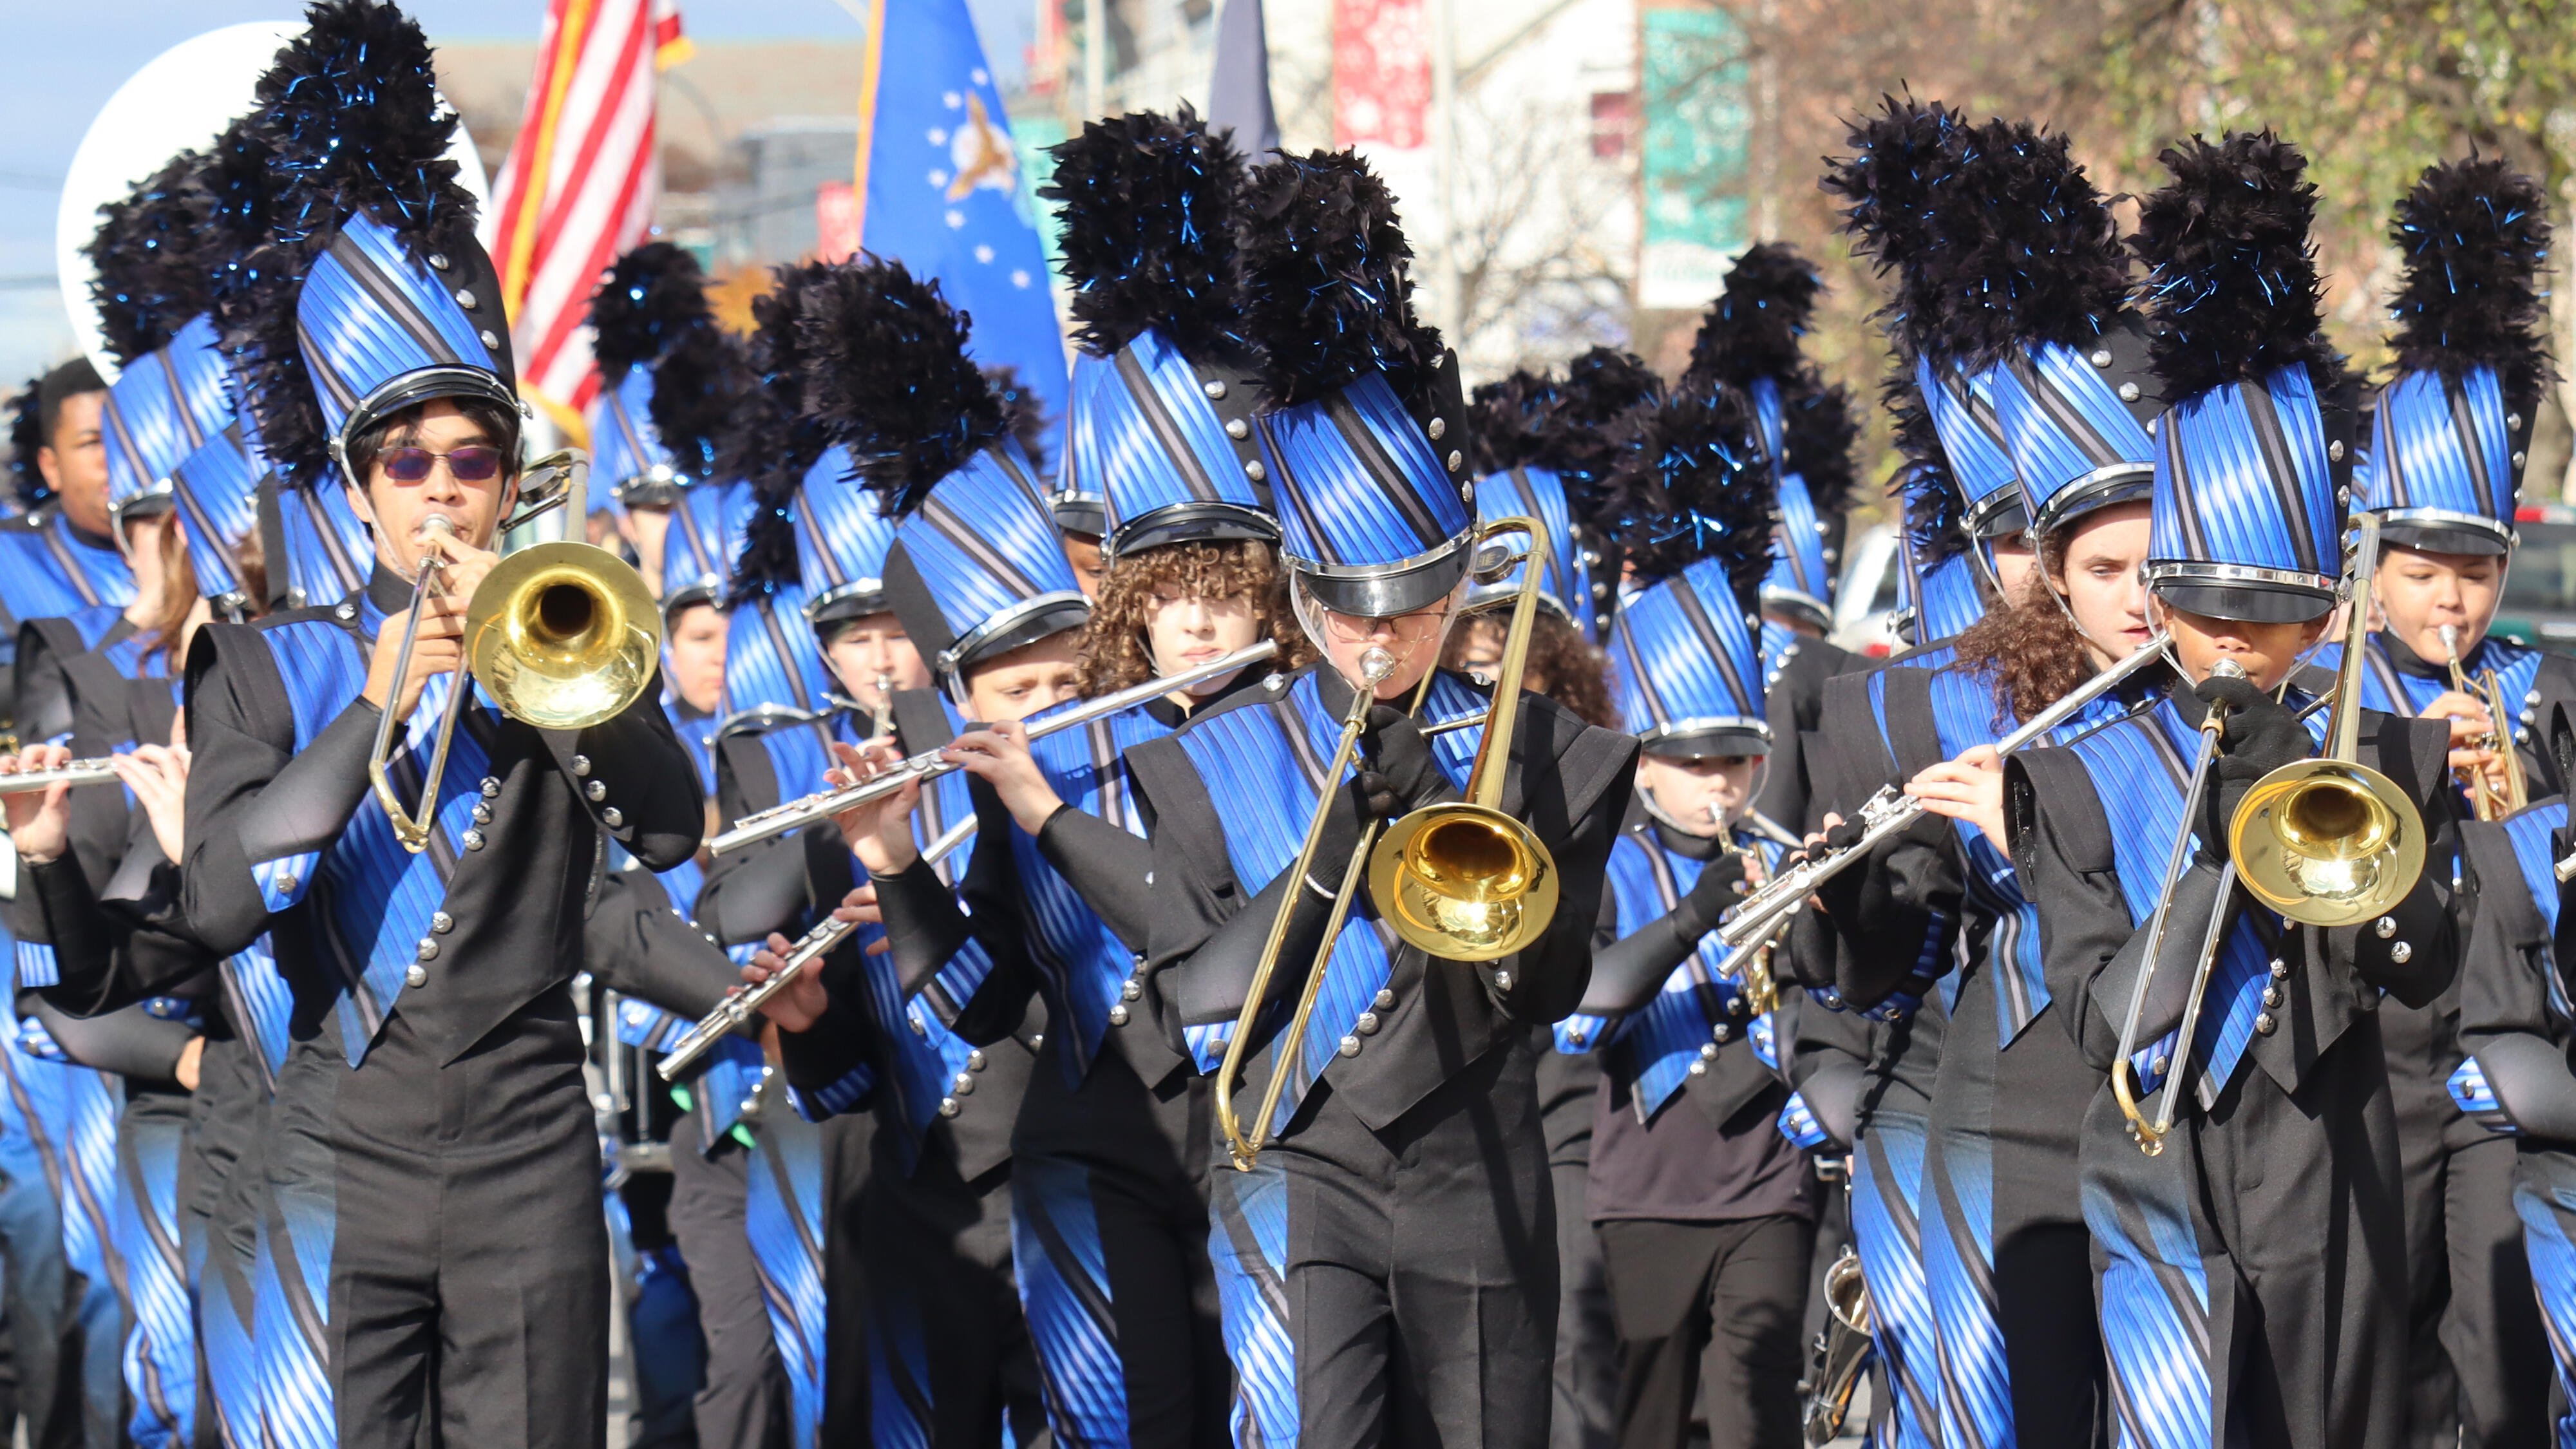 Marching Falcons marching in the Albany Veterans Day Parade